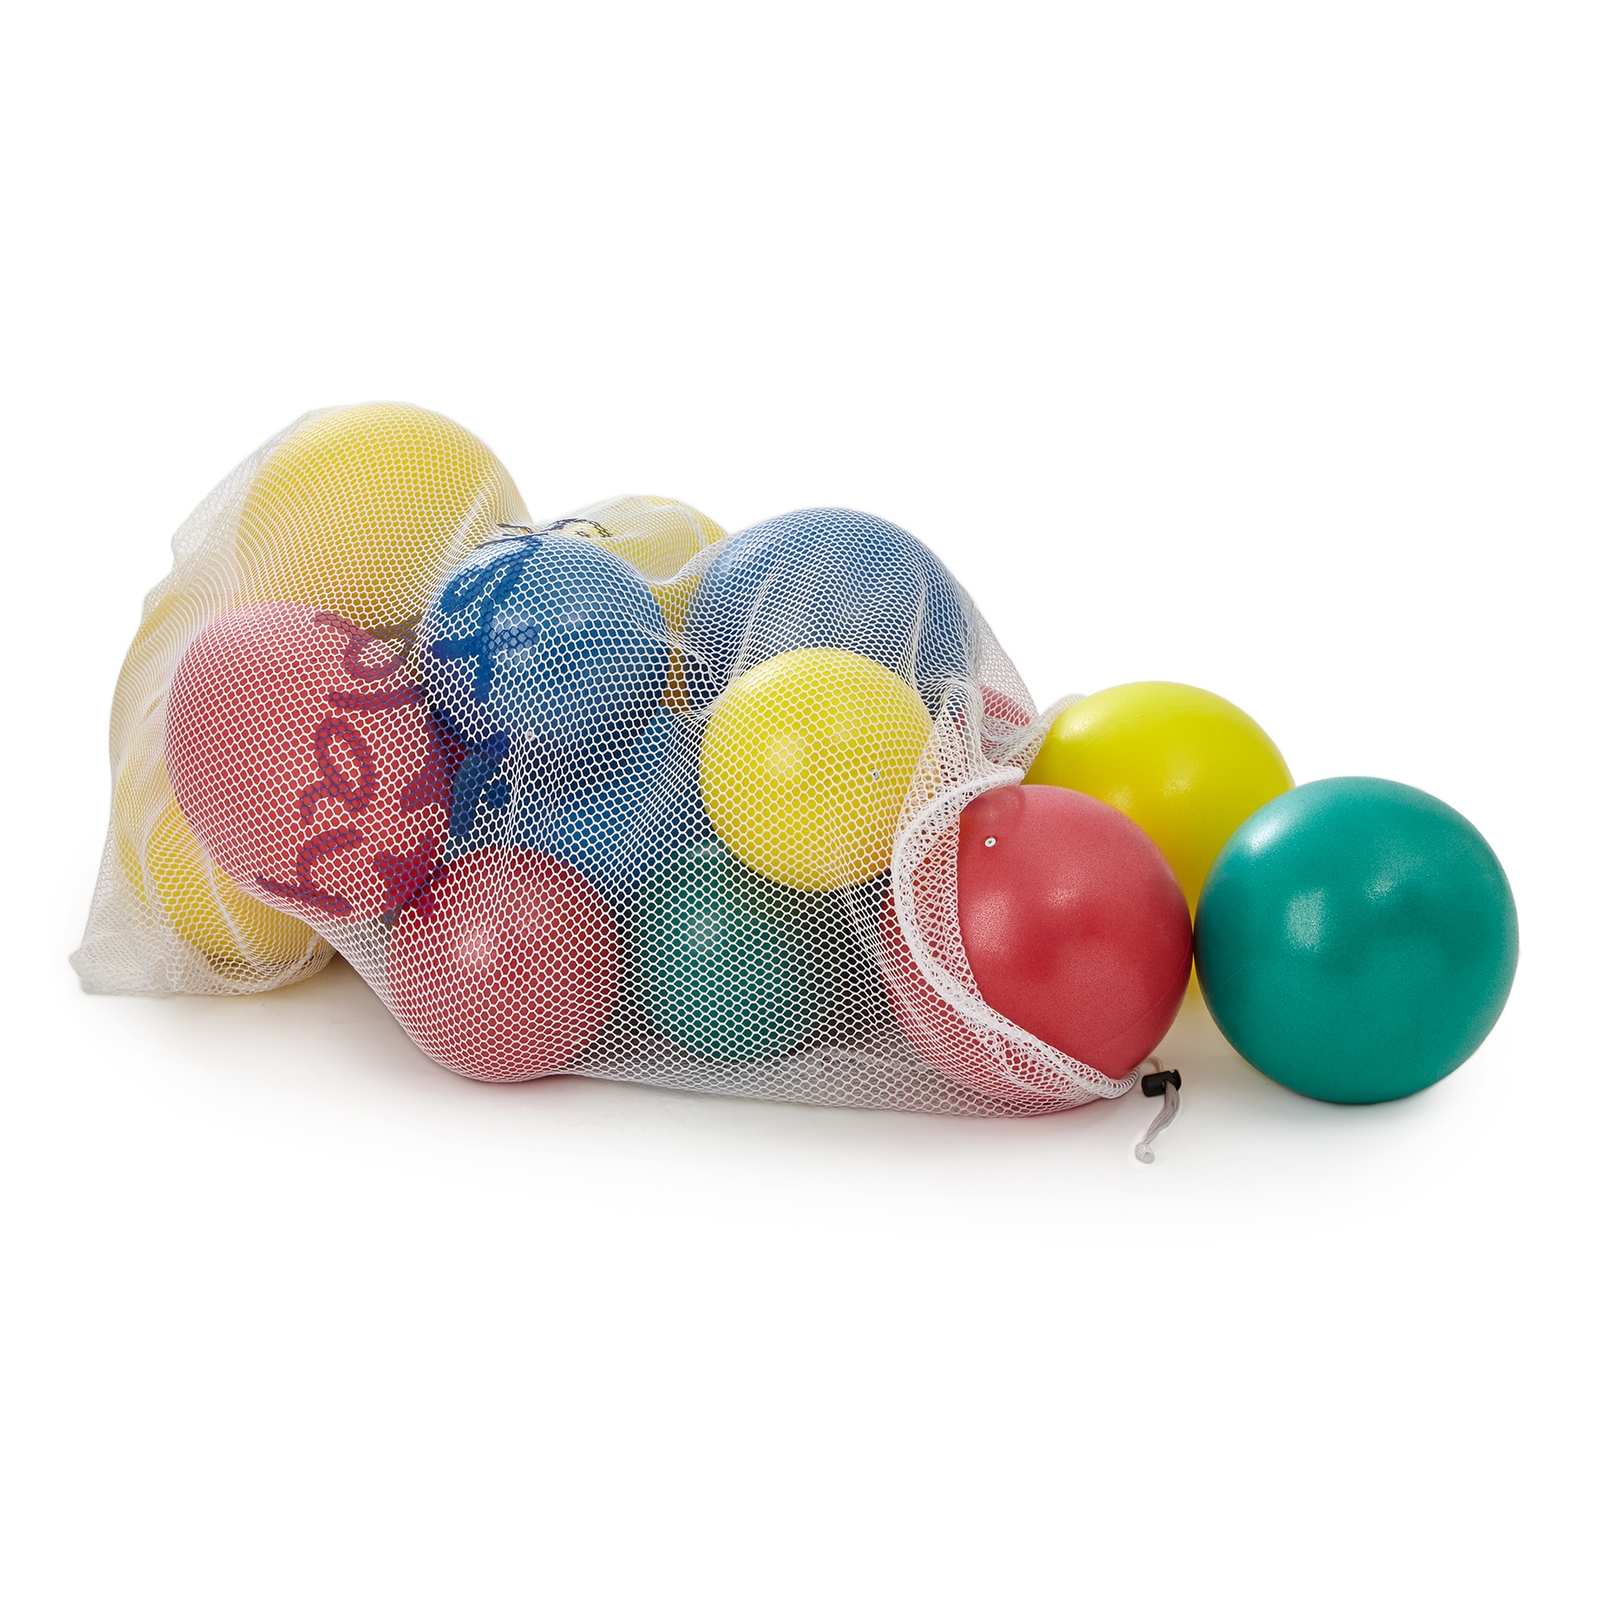 Bag of Mixed Sized Soft Balls - Assorted - Pack of 18